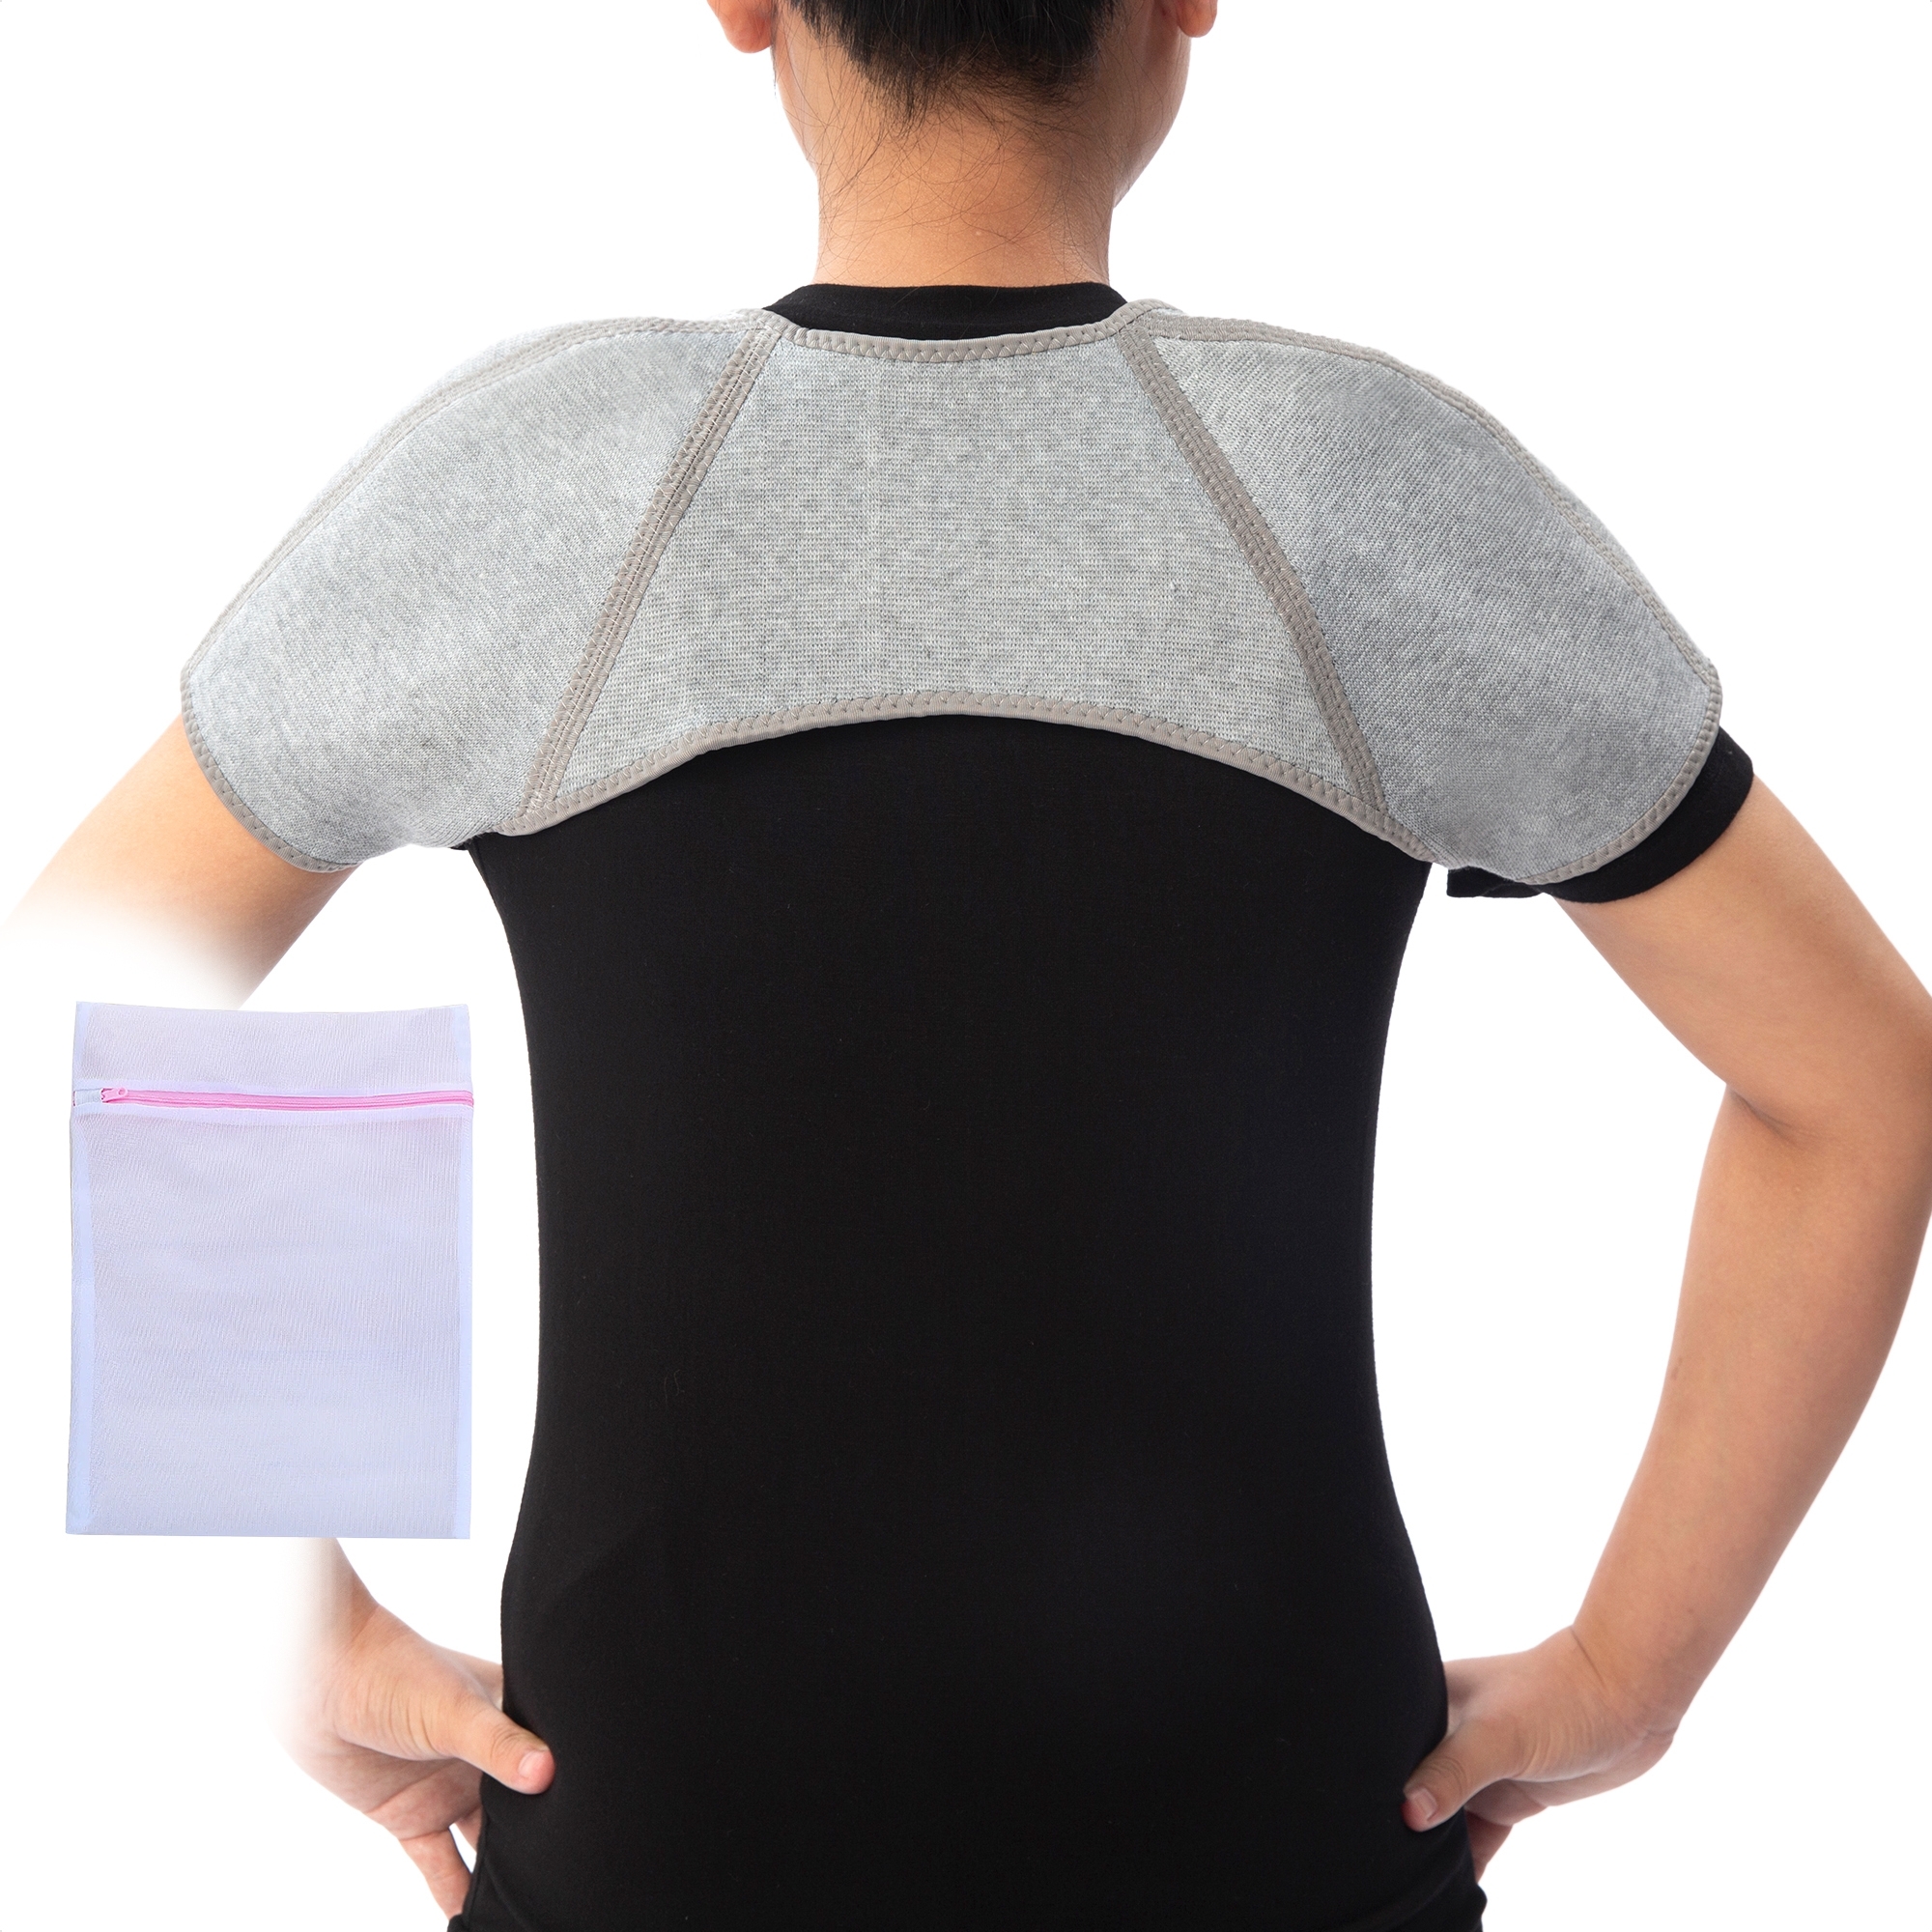 Double Shoulder Support Compression Brace For Injury S, M, L, XL, Grey